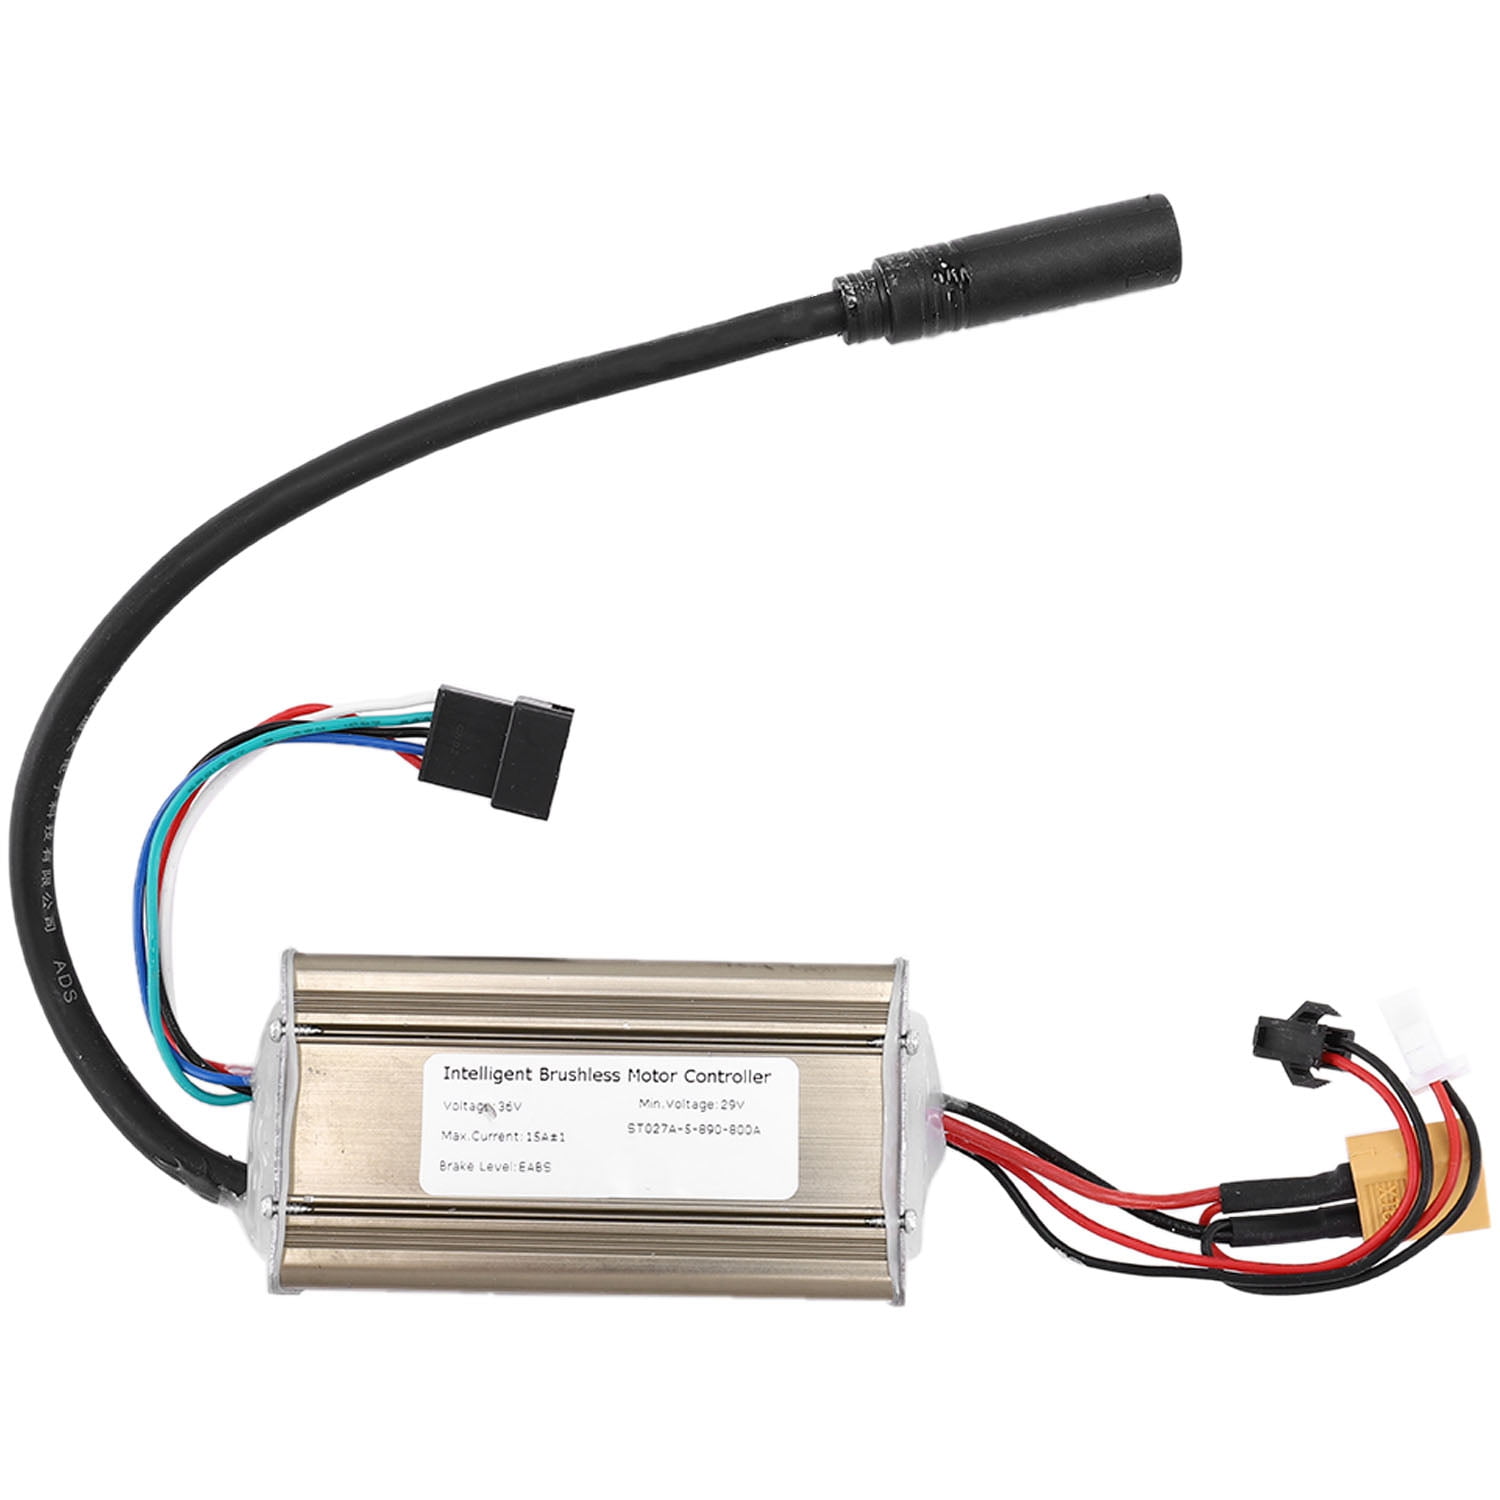 36V Intelligent Brushless Motor Controller Wired for KUGOO S2 Electric Scooter 